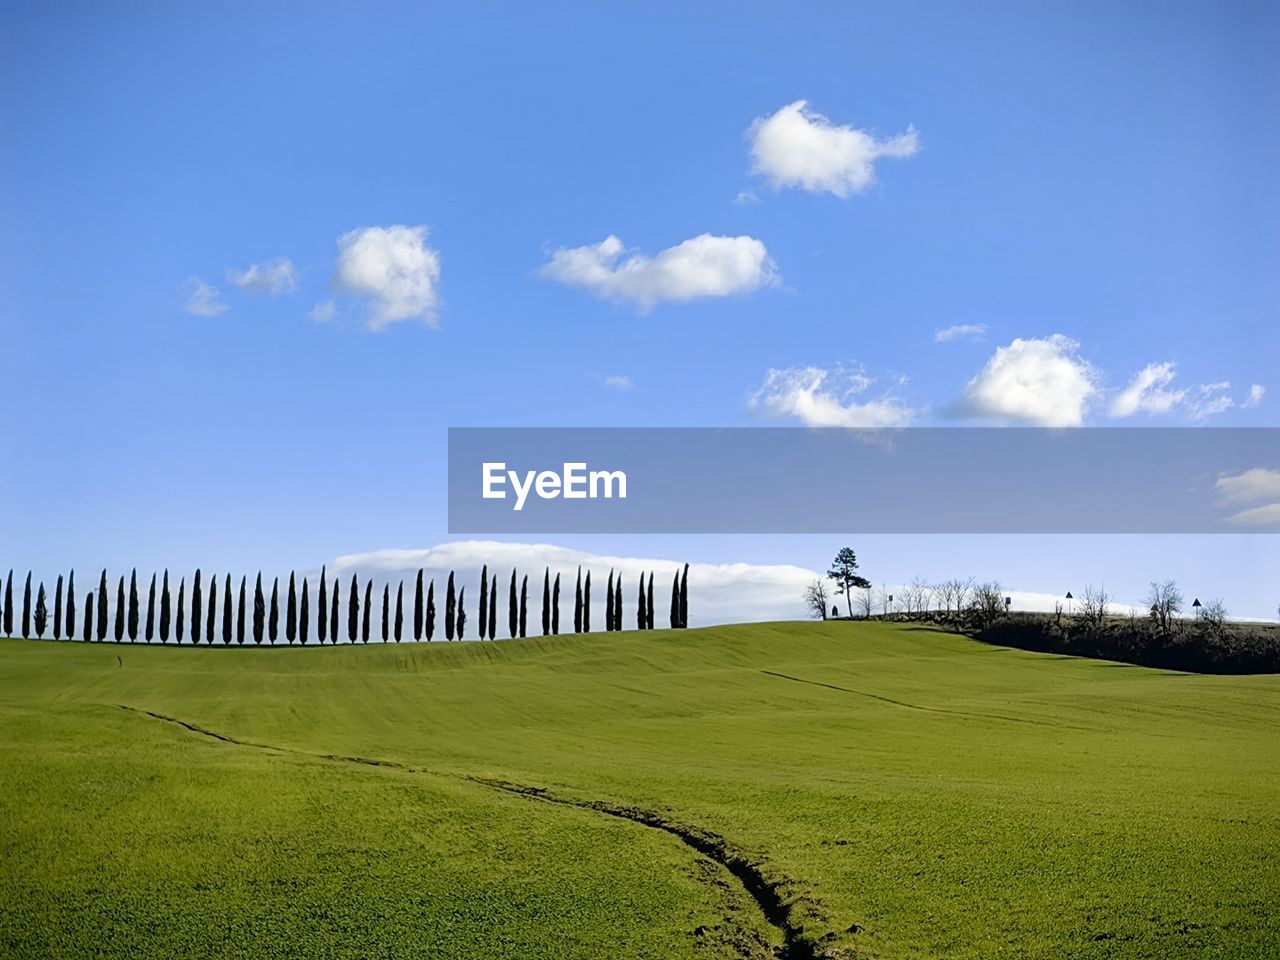 scenic view of grassy field against sky